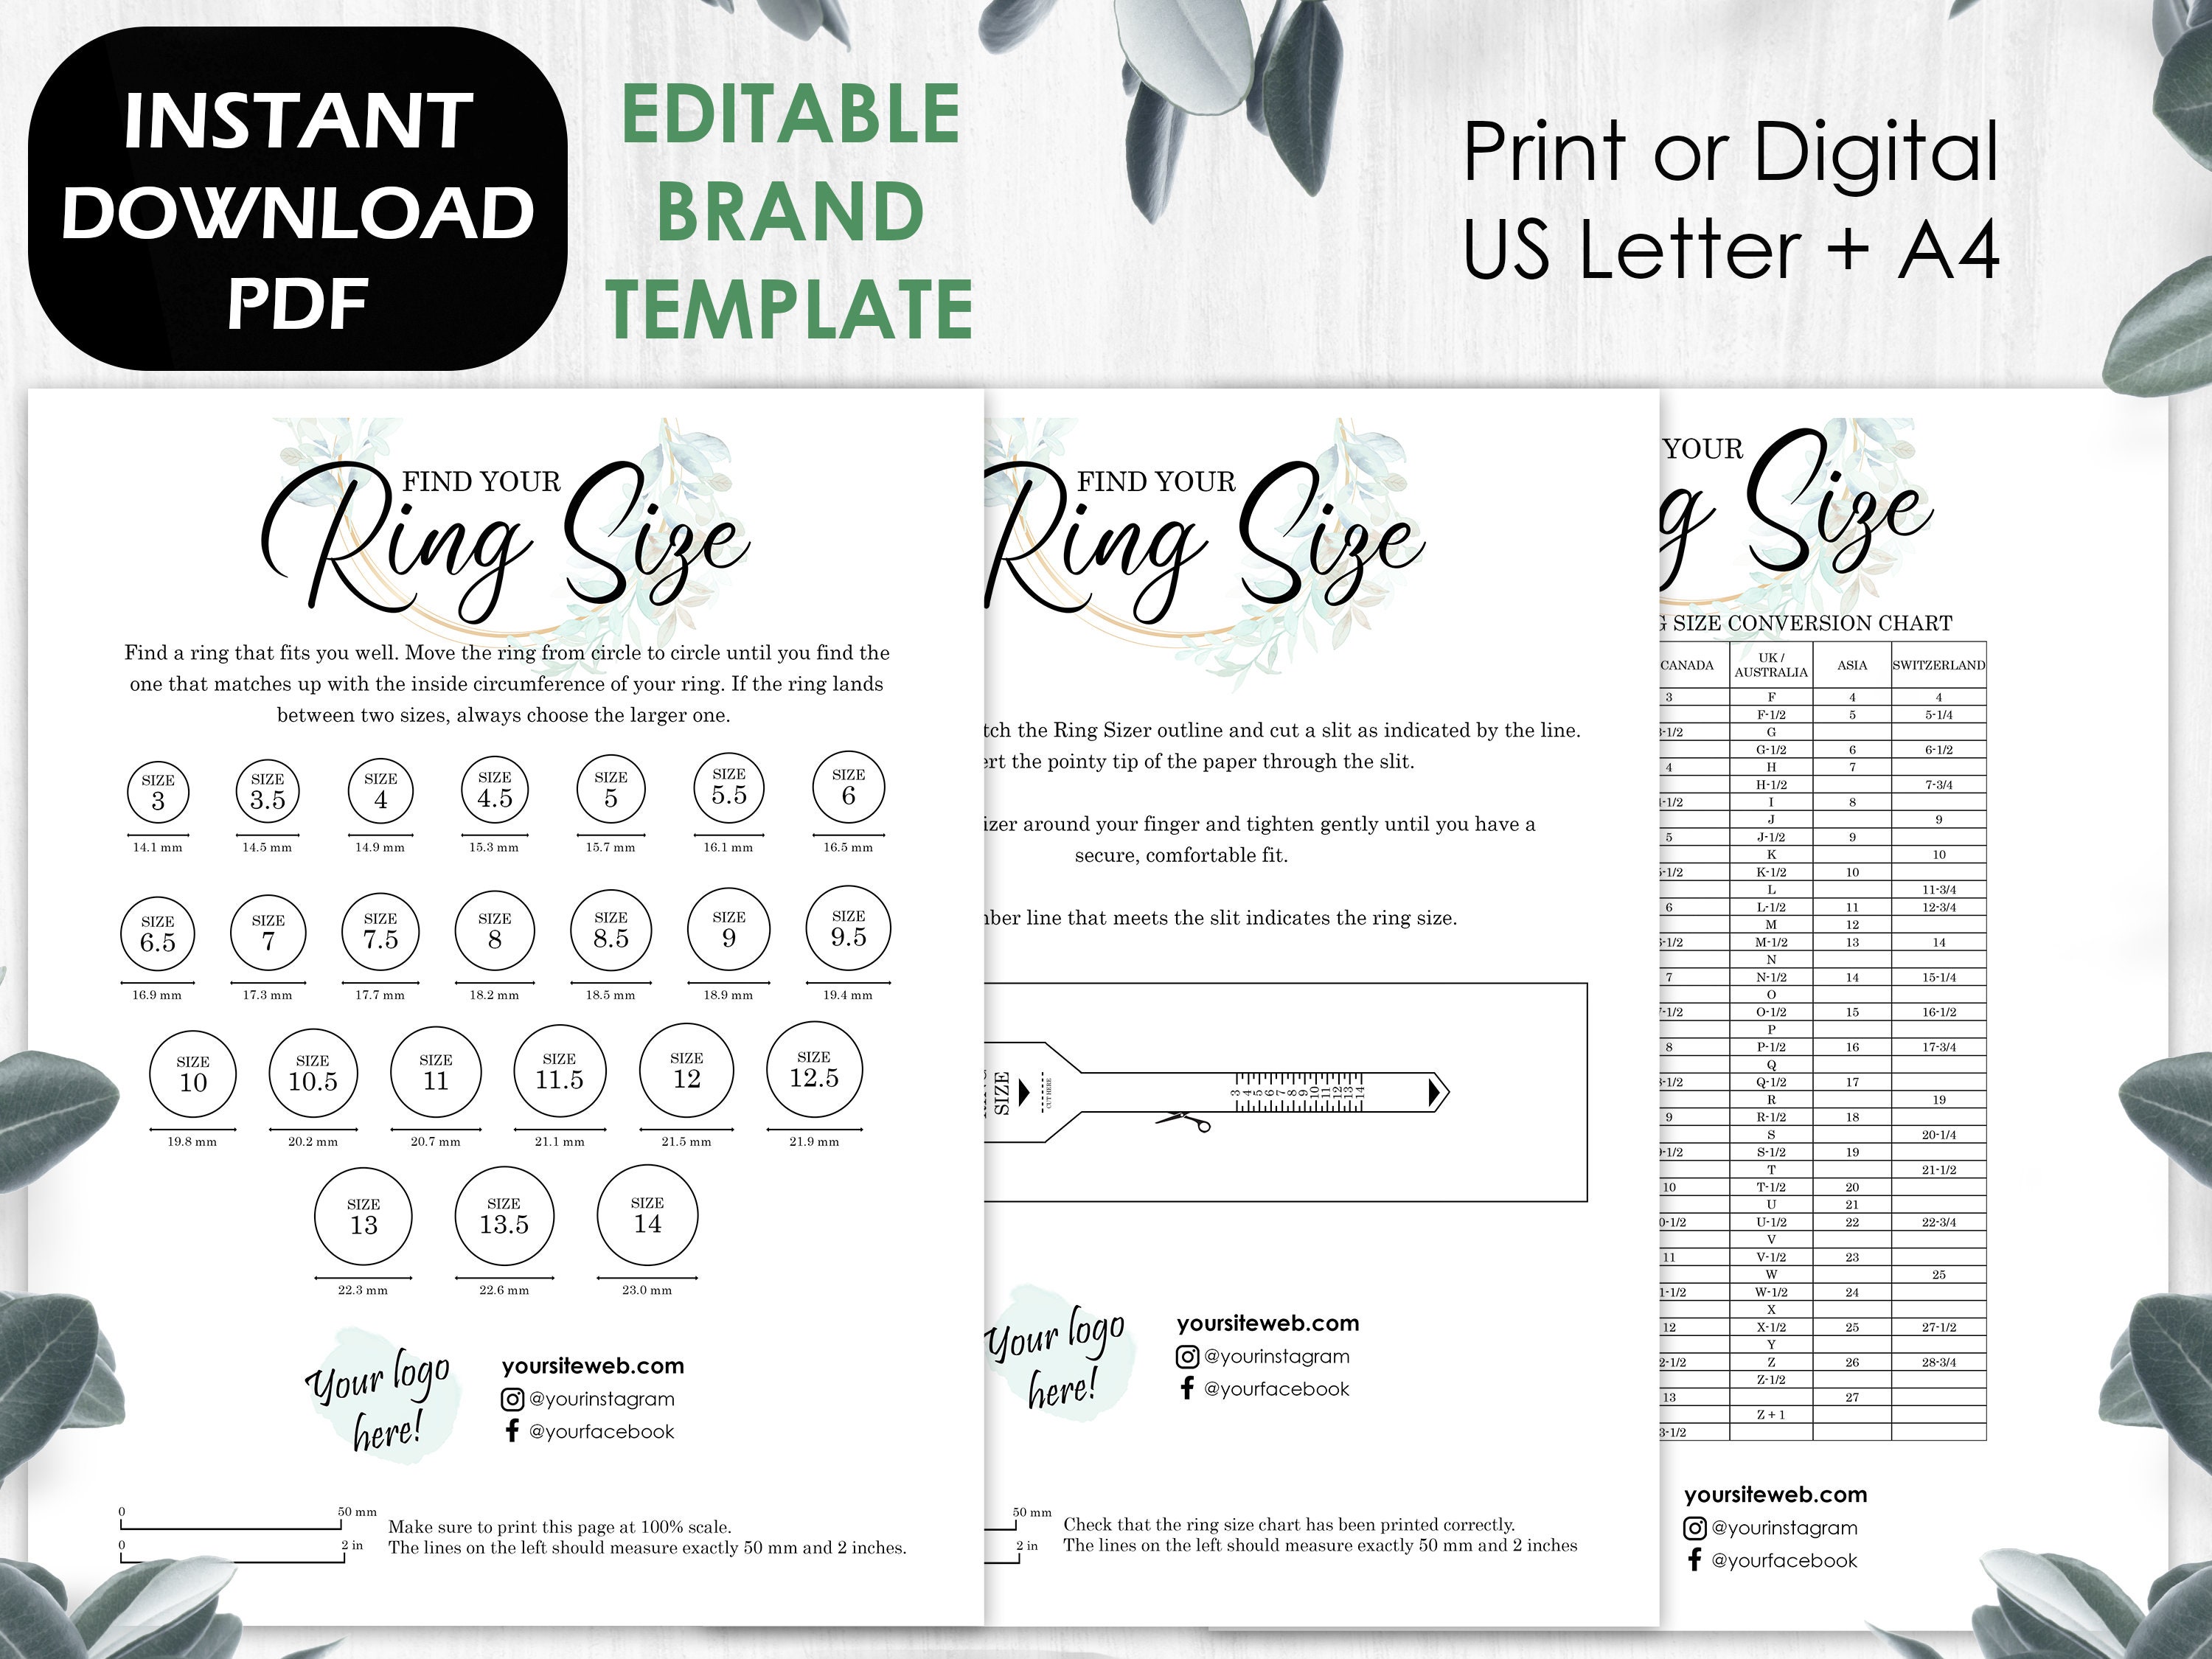 Printable Ring Sizer Chart Find Your Ring Size Instantly With Our